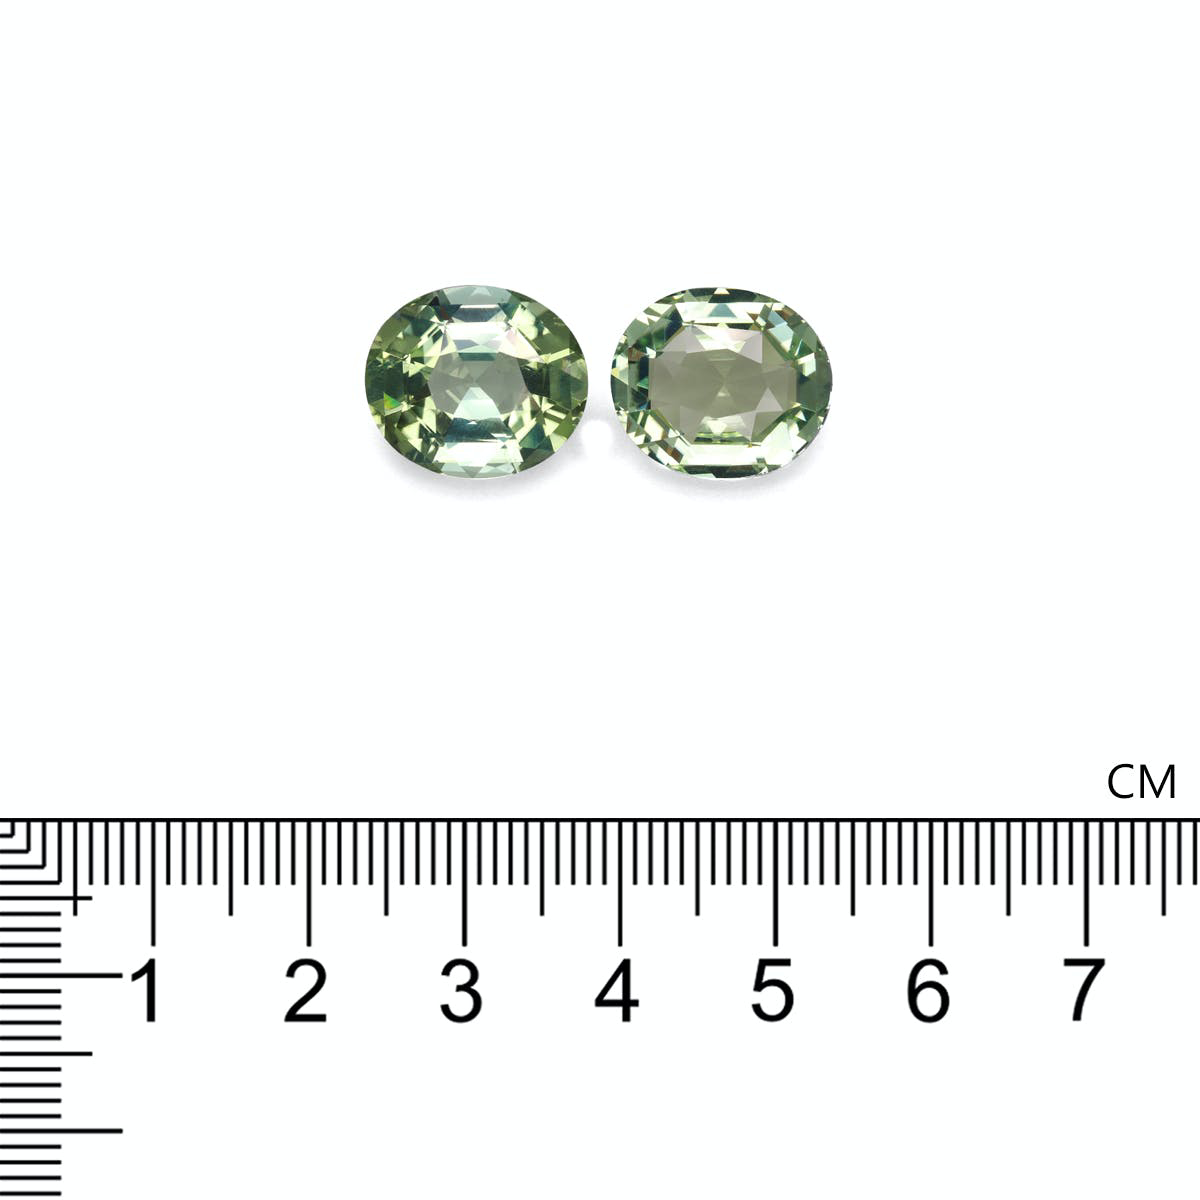 Picture of Green Tourmaline 16.97ct - 14x12mm Pair (TG0547)